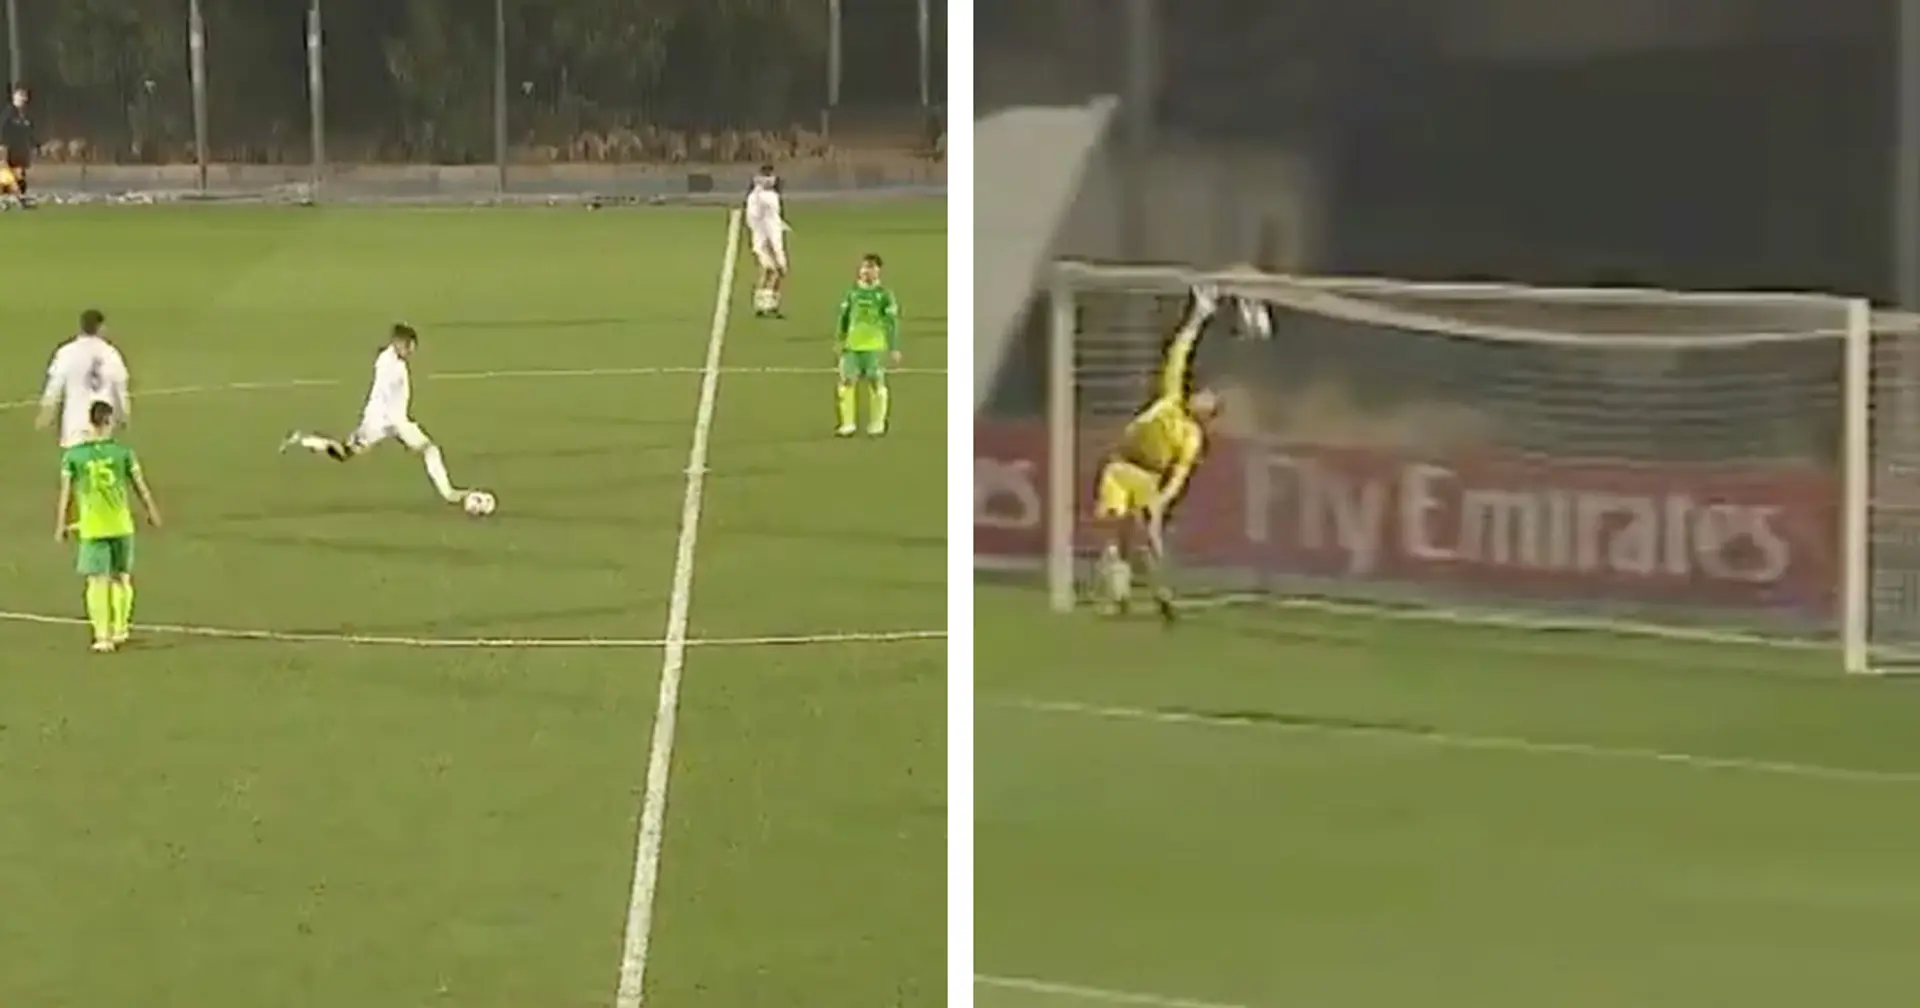 Real Madrid U19's Alvaro Carrillo scores goal from own half with perfect free-kick attempt (video)